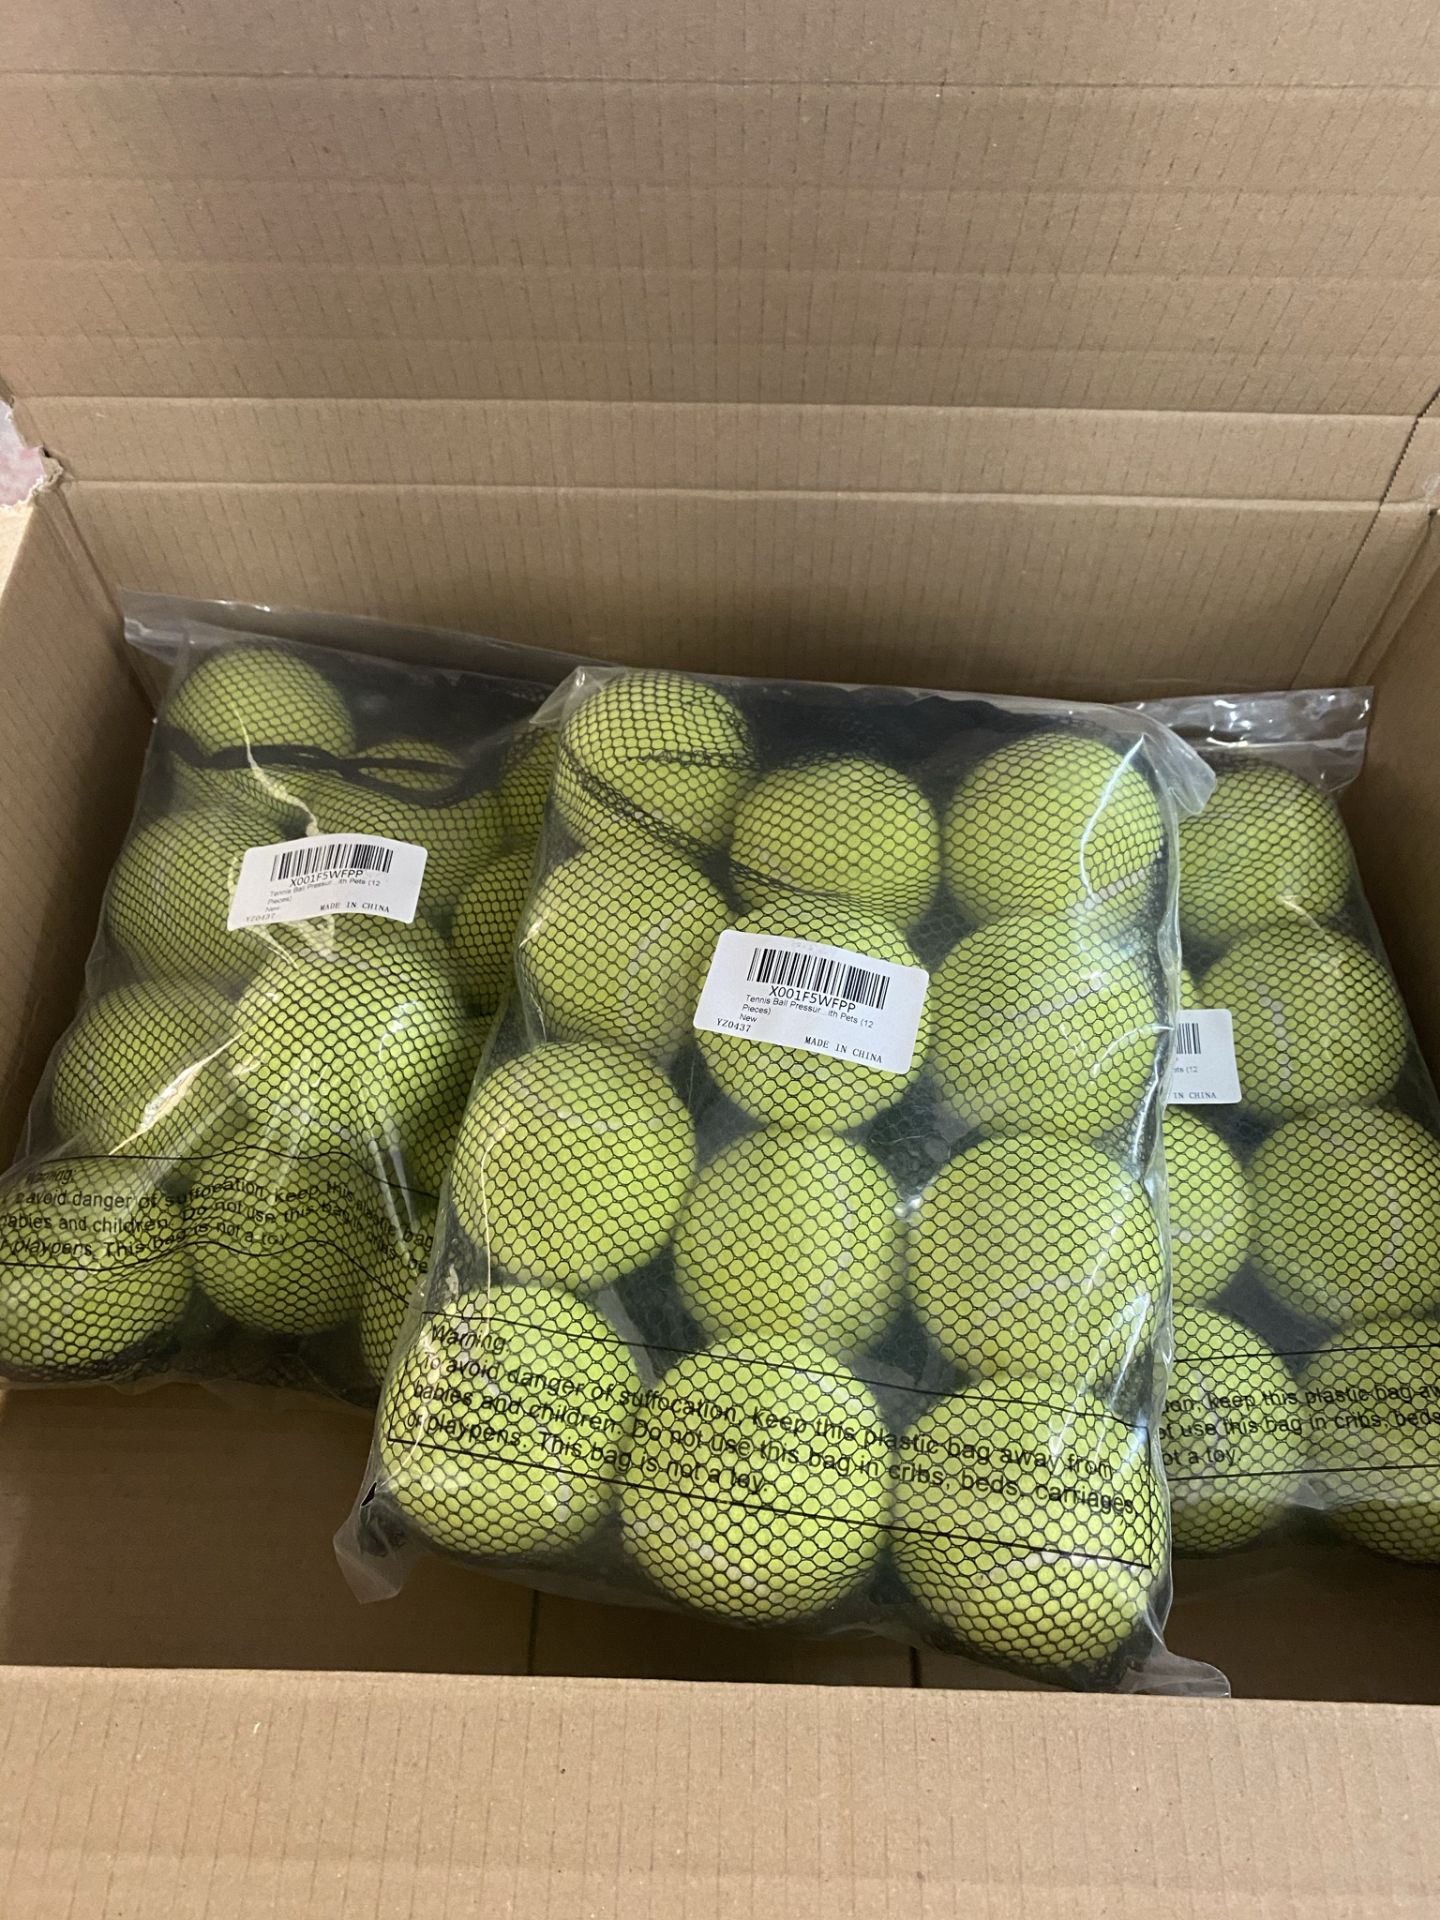 Tennis Ball Dog Toy Ball Sturdy Durable Tennis Ball with Mesh Carrying Bag, 3 Packs of 12